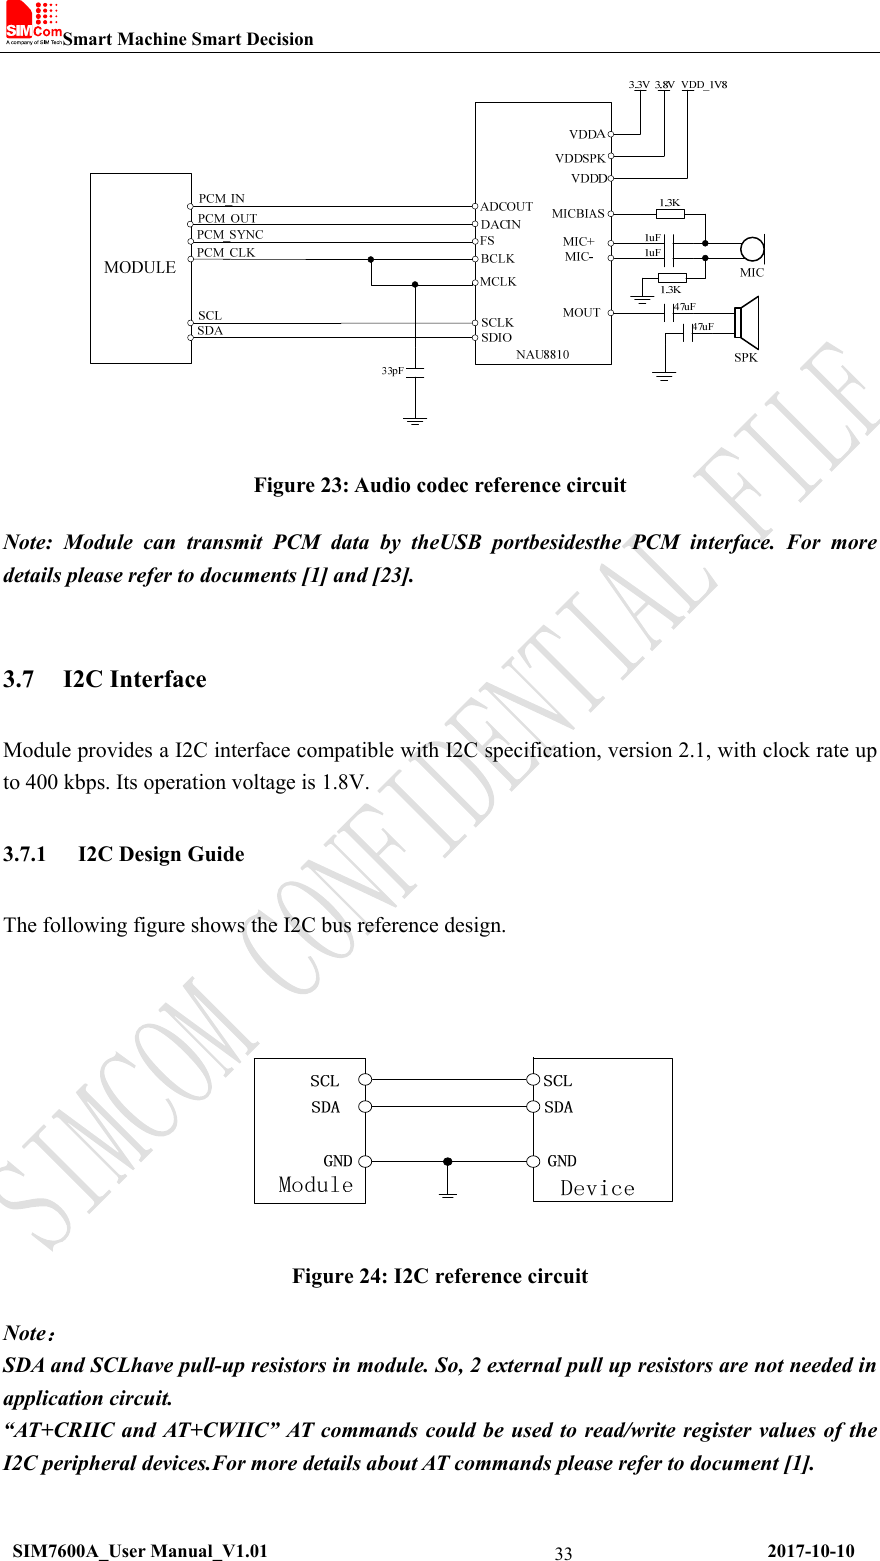 Smart Machine Smart Decision  SIM7600A_User Manual_V1.01                                                     2017-10-10 33 Figure 23: Audio codec reference circuit Note: Module can transmit PCM data by theUSB portbesidesthe PCM interface. For more details please refer to documents [1] and [23].  3.7 I2C Interface Module provides a I2C interface compatible with I2C specification, version 2.1, with clock rate up to 400 kbps. Its operation voltage is 1.8V. 3.7.1 I2C Design Guide The following figure shows the I2C bus reference design.  Figure 24: I2C reference circuit Note： SDA and SCLhave pull-up resistors in module. So, 2 external pull up resistors are not needed in application circuit.   “AT+CRIIC and AT+CWIIC” AT commands could be used to read/write register values of the I2C peripheral devices.For more details about AT commands please refer to document [1]. 